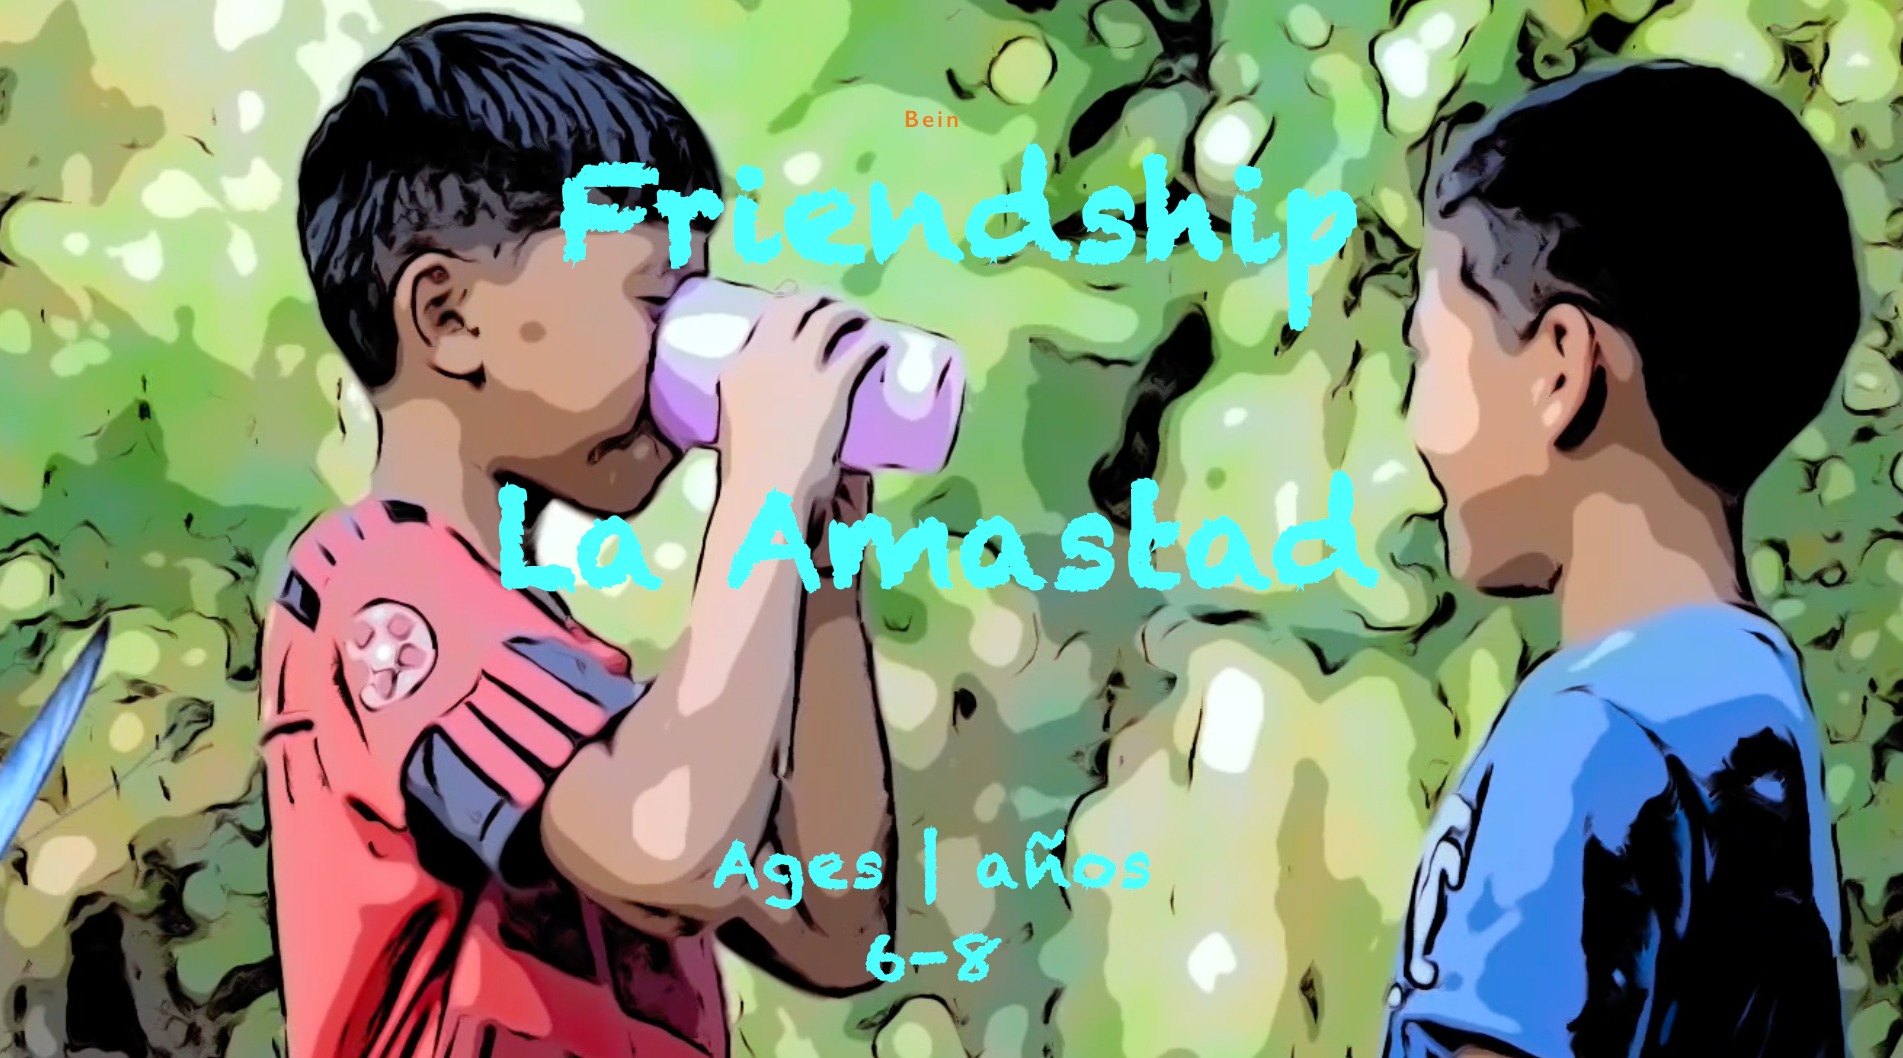 Friendship for 6-8 year olds